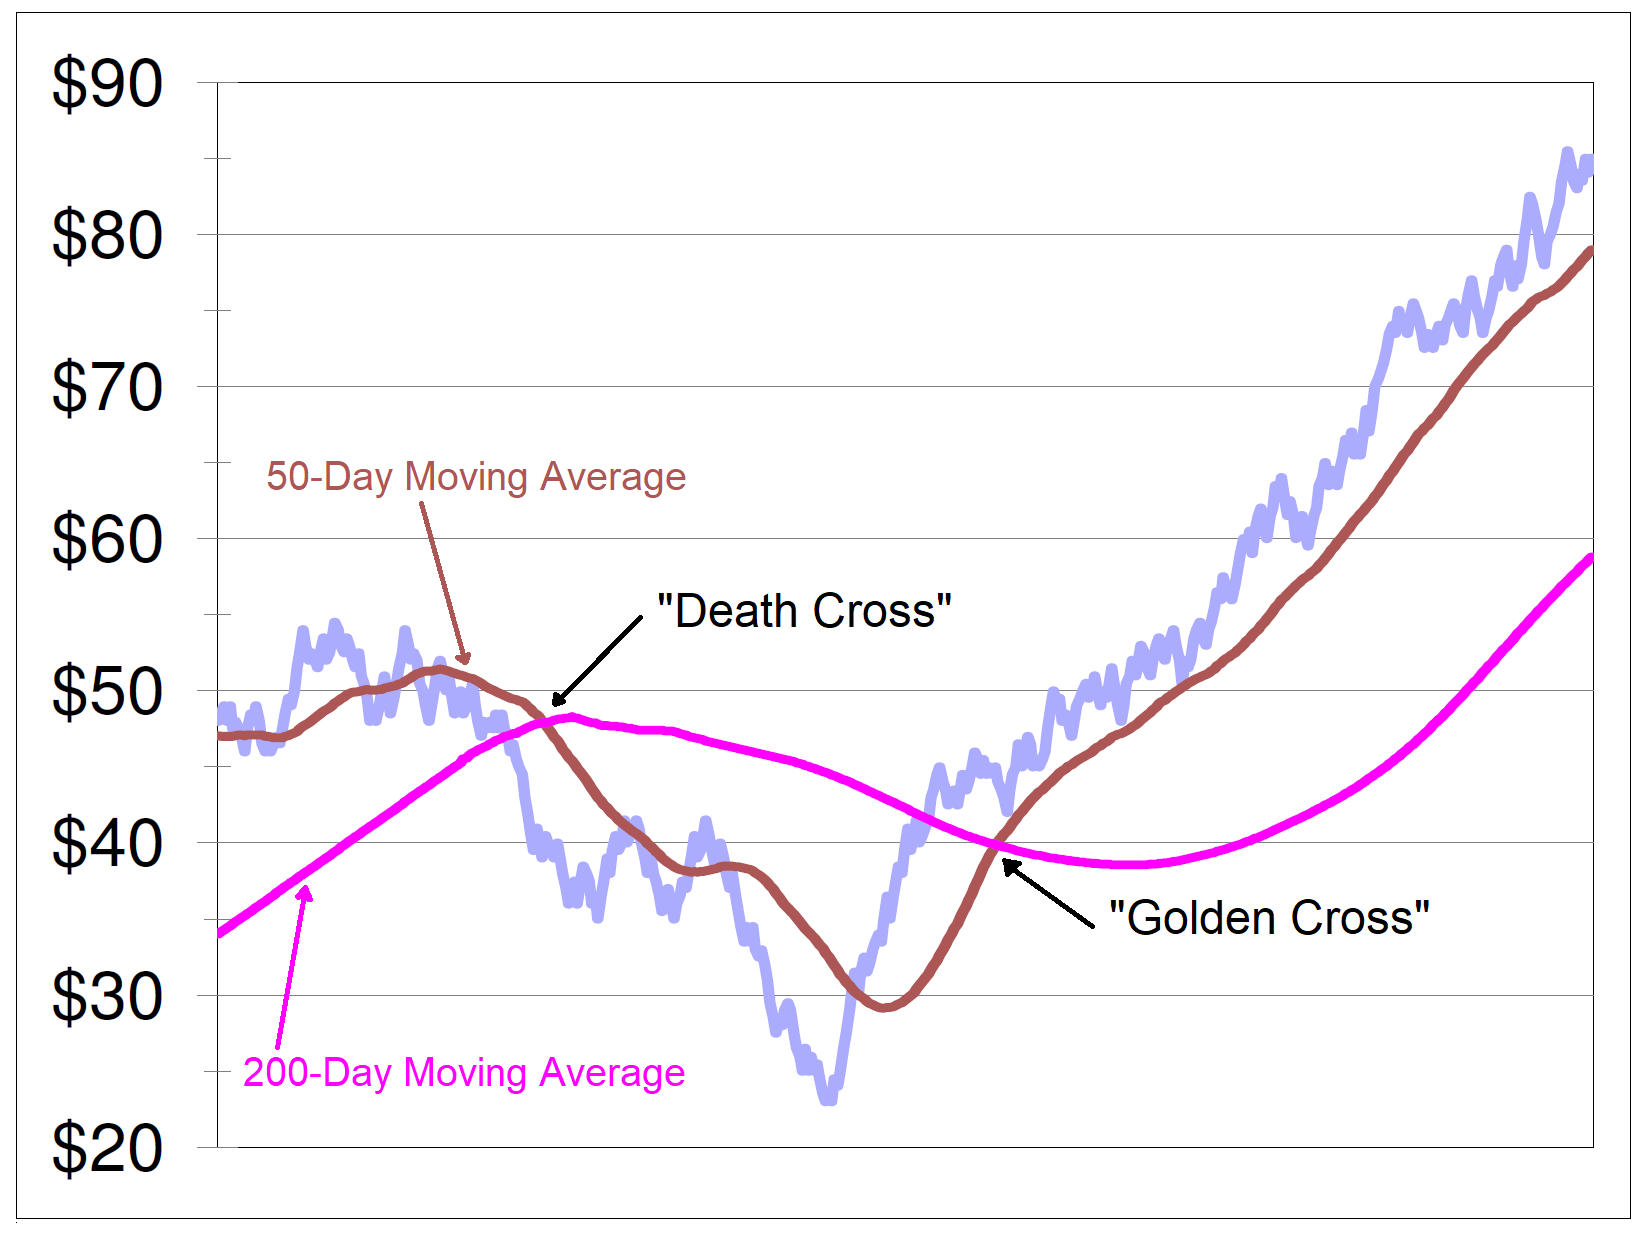 Simple moving averages and the death cross and golden cross, tools of Technical Analysis